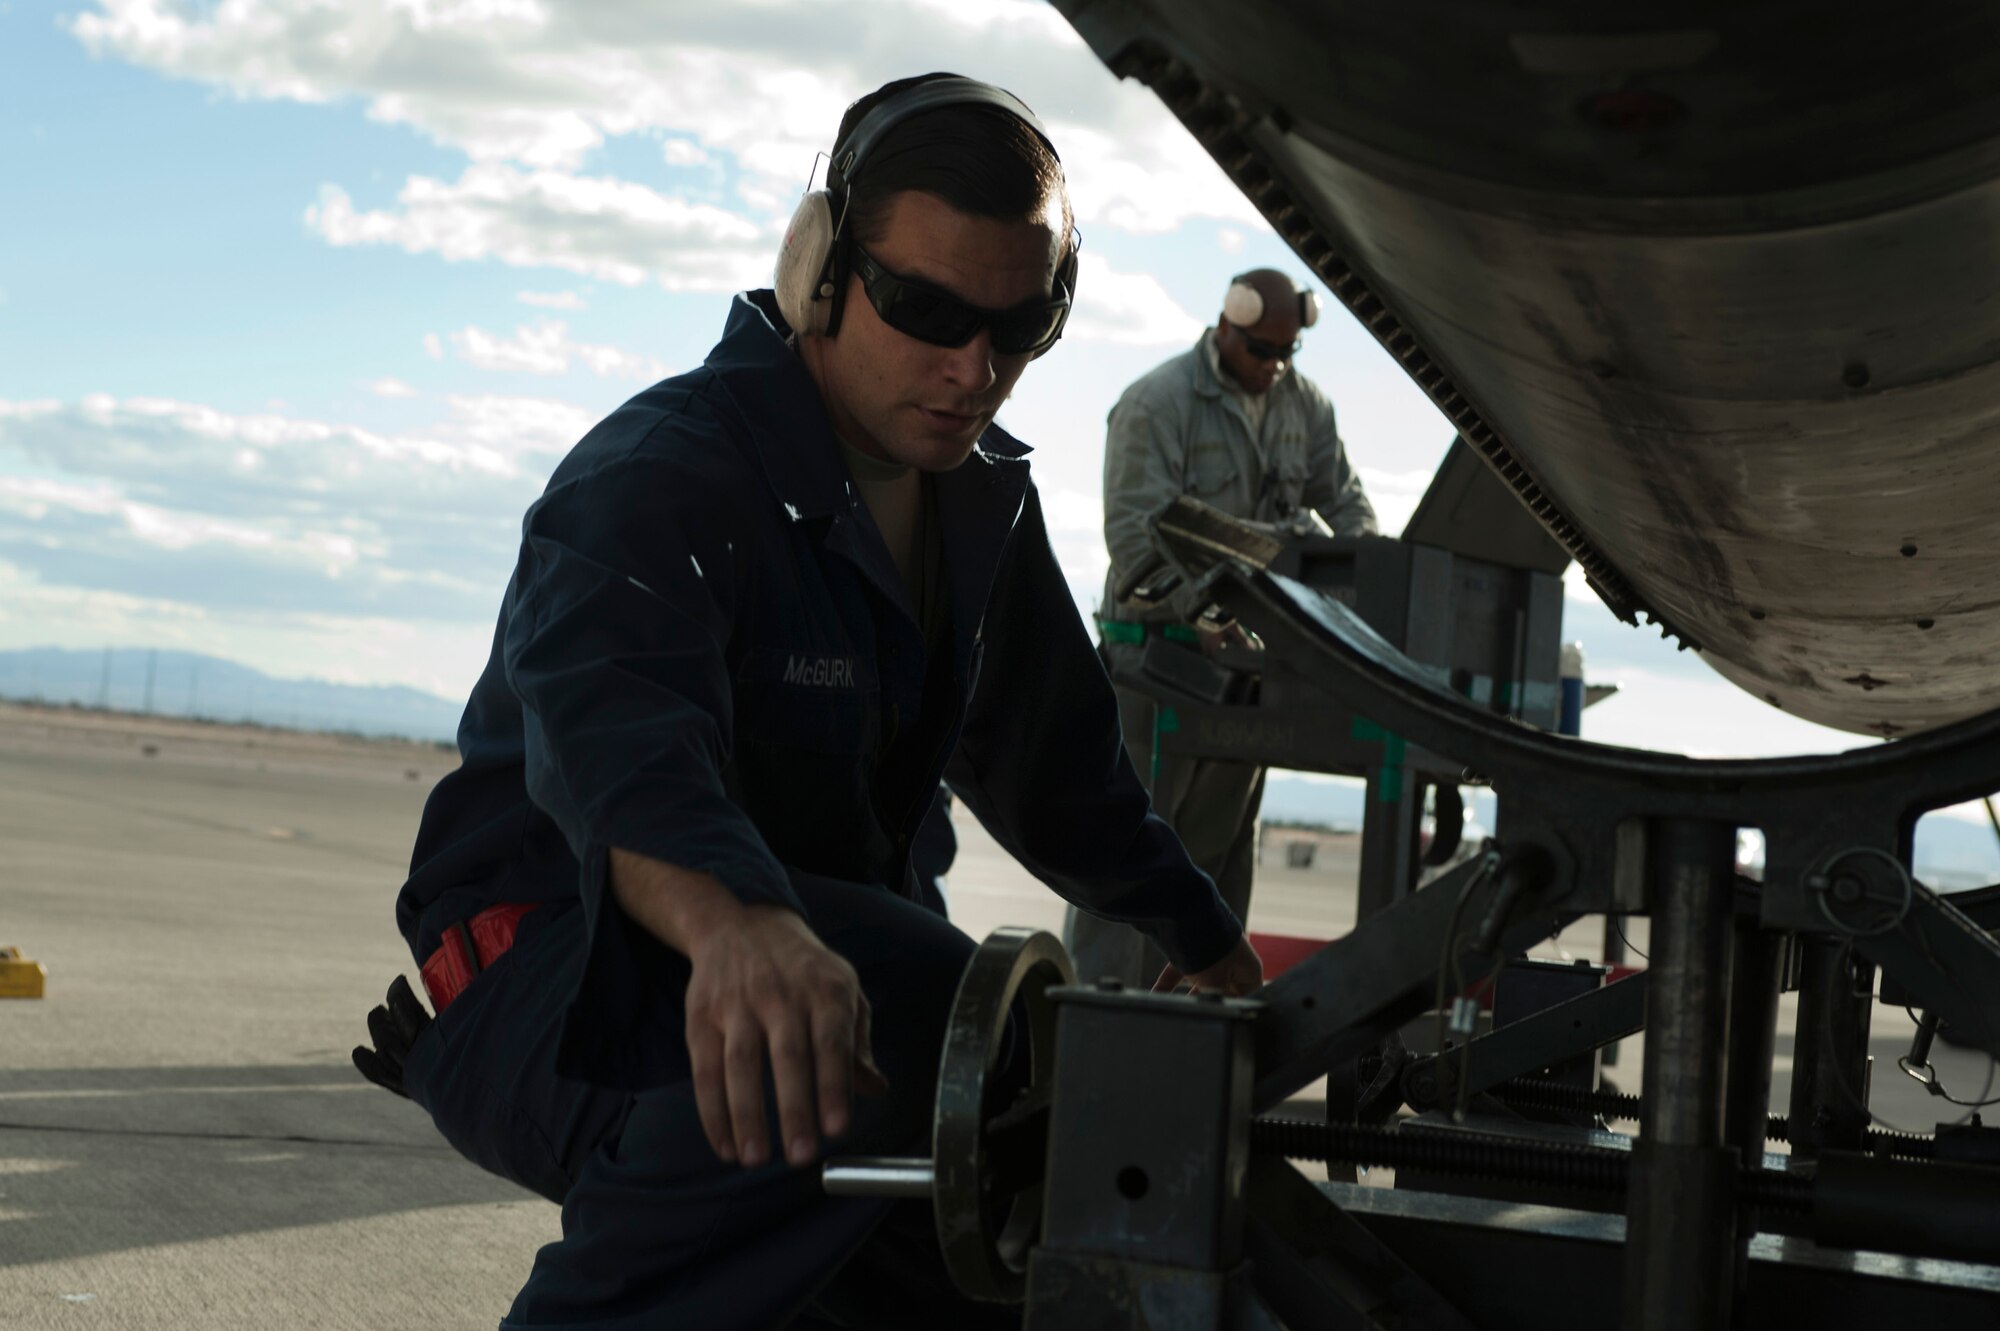 U.S. Air Force Tech Sgt. Donnie McGuark, 57th Aircraft Maintenance Squadron Viper Aircraft Maintenance Unit crew chief, lowers a lift used to install a new F-16 Fighting Falcon fuel tank on the flightline Feb. 10, 2014, at Nellis Air Force Base, Nev. The lift has a front and back crank in order to provide an easier installation of fuel tanks. (U.S. Air Force photo by Airman 1st Class Timothy Young)